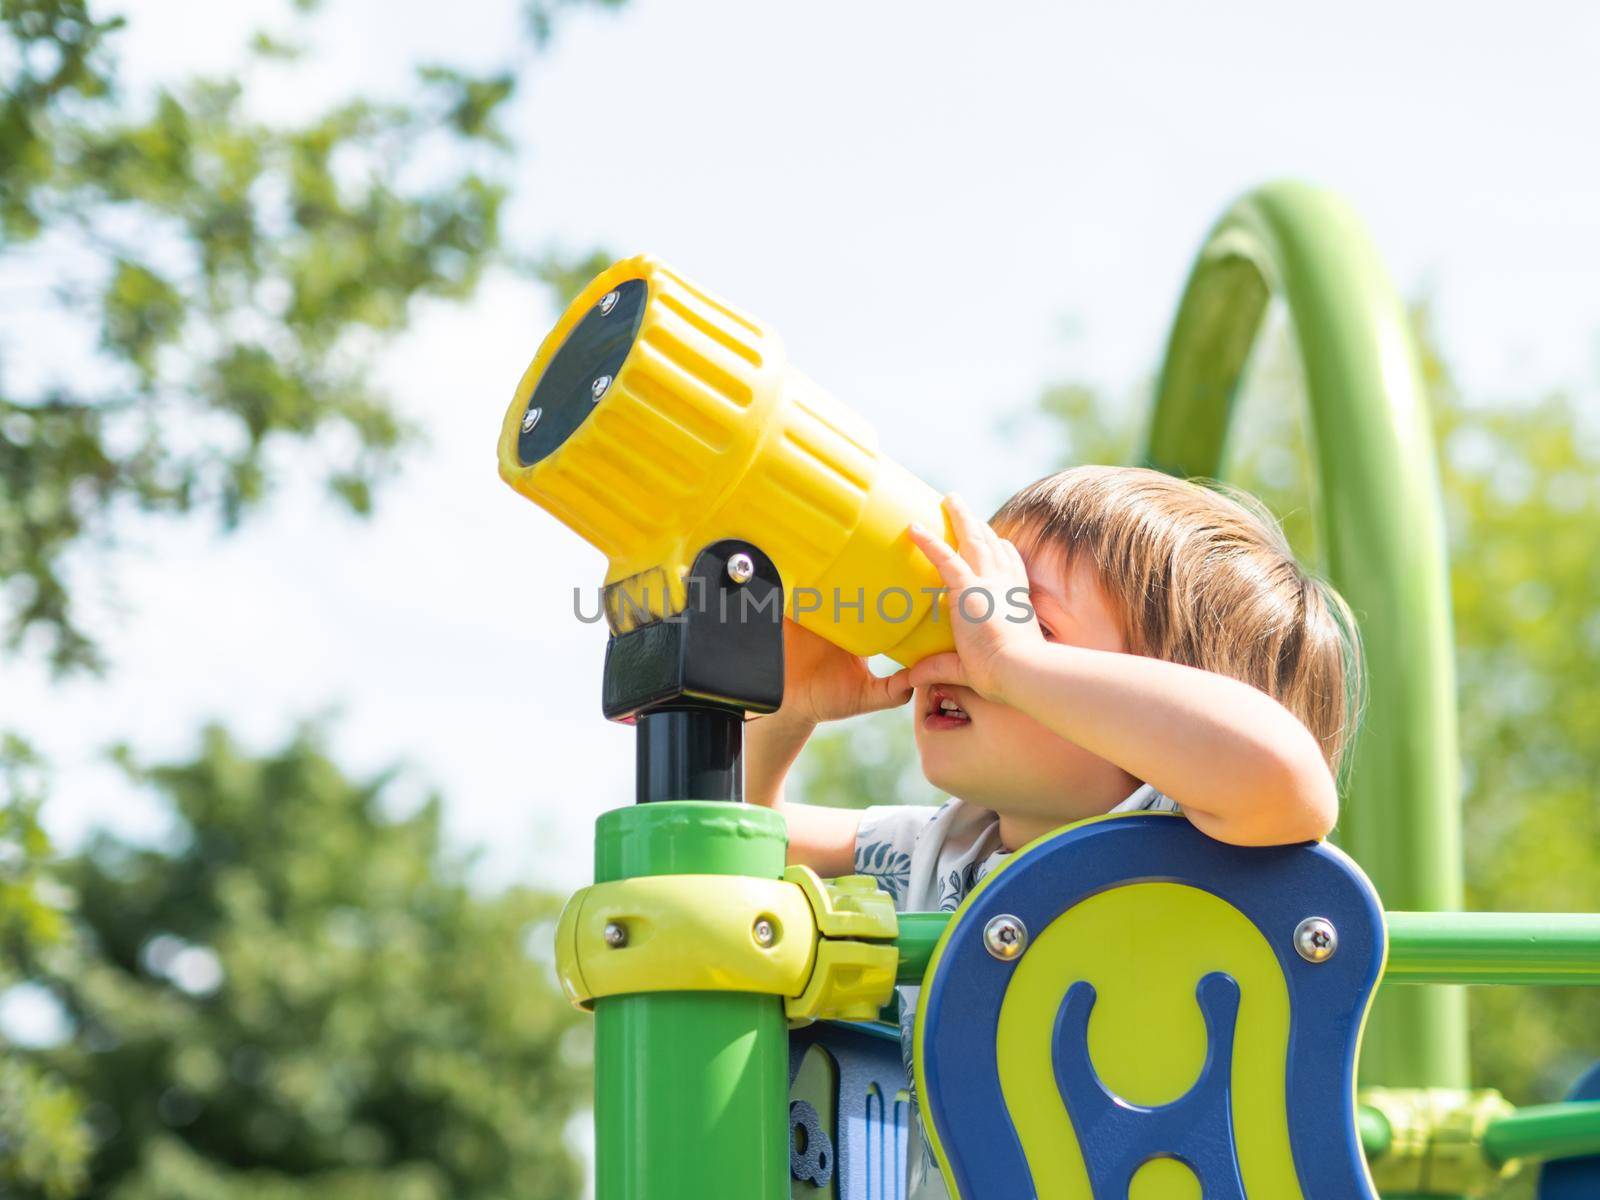 Little kid looks in toy telescope on outdoor playground. Leisure activity for curious children. Summer fun.